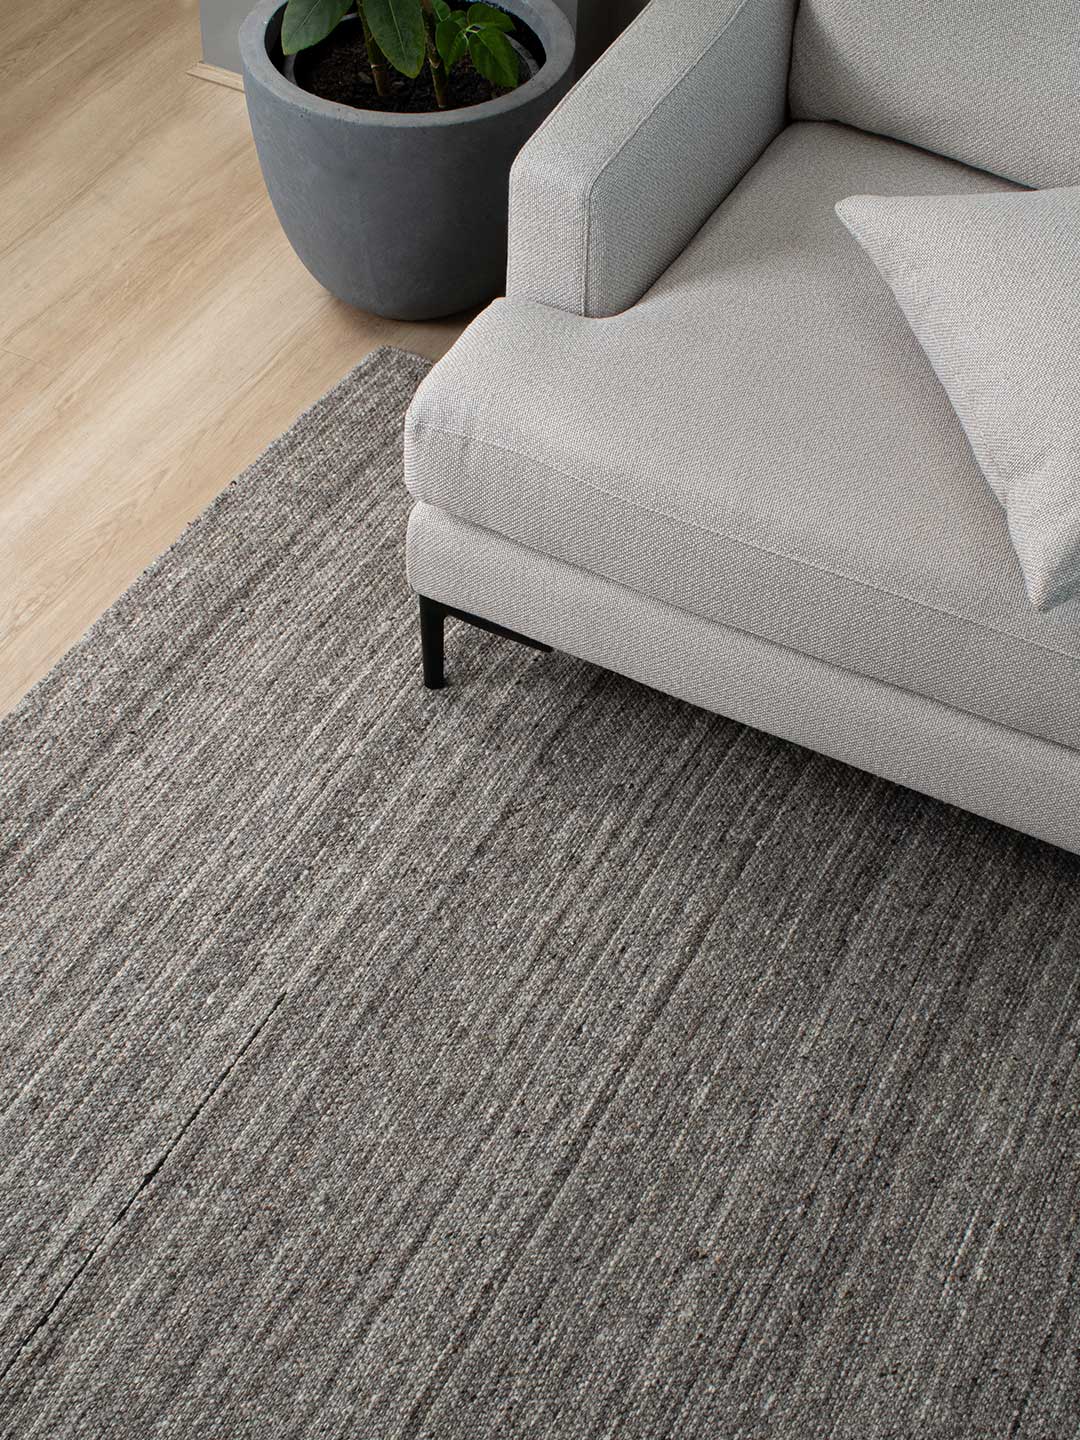 Layla-taupe-grey-brown-stans-rug-centre-Back-flatweave-modern-rugs-perth